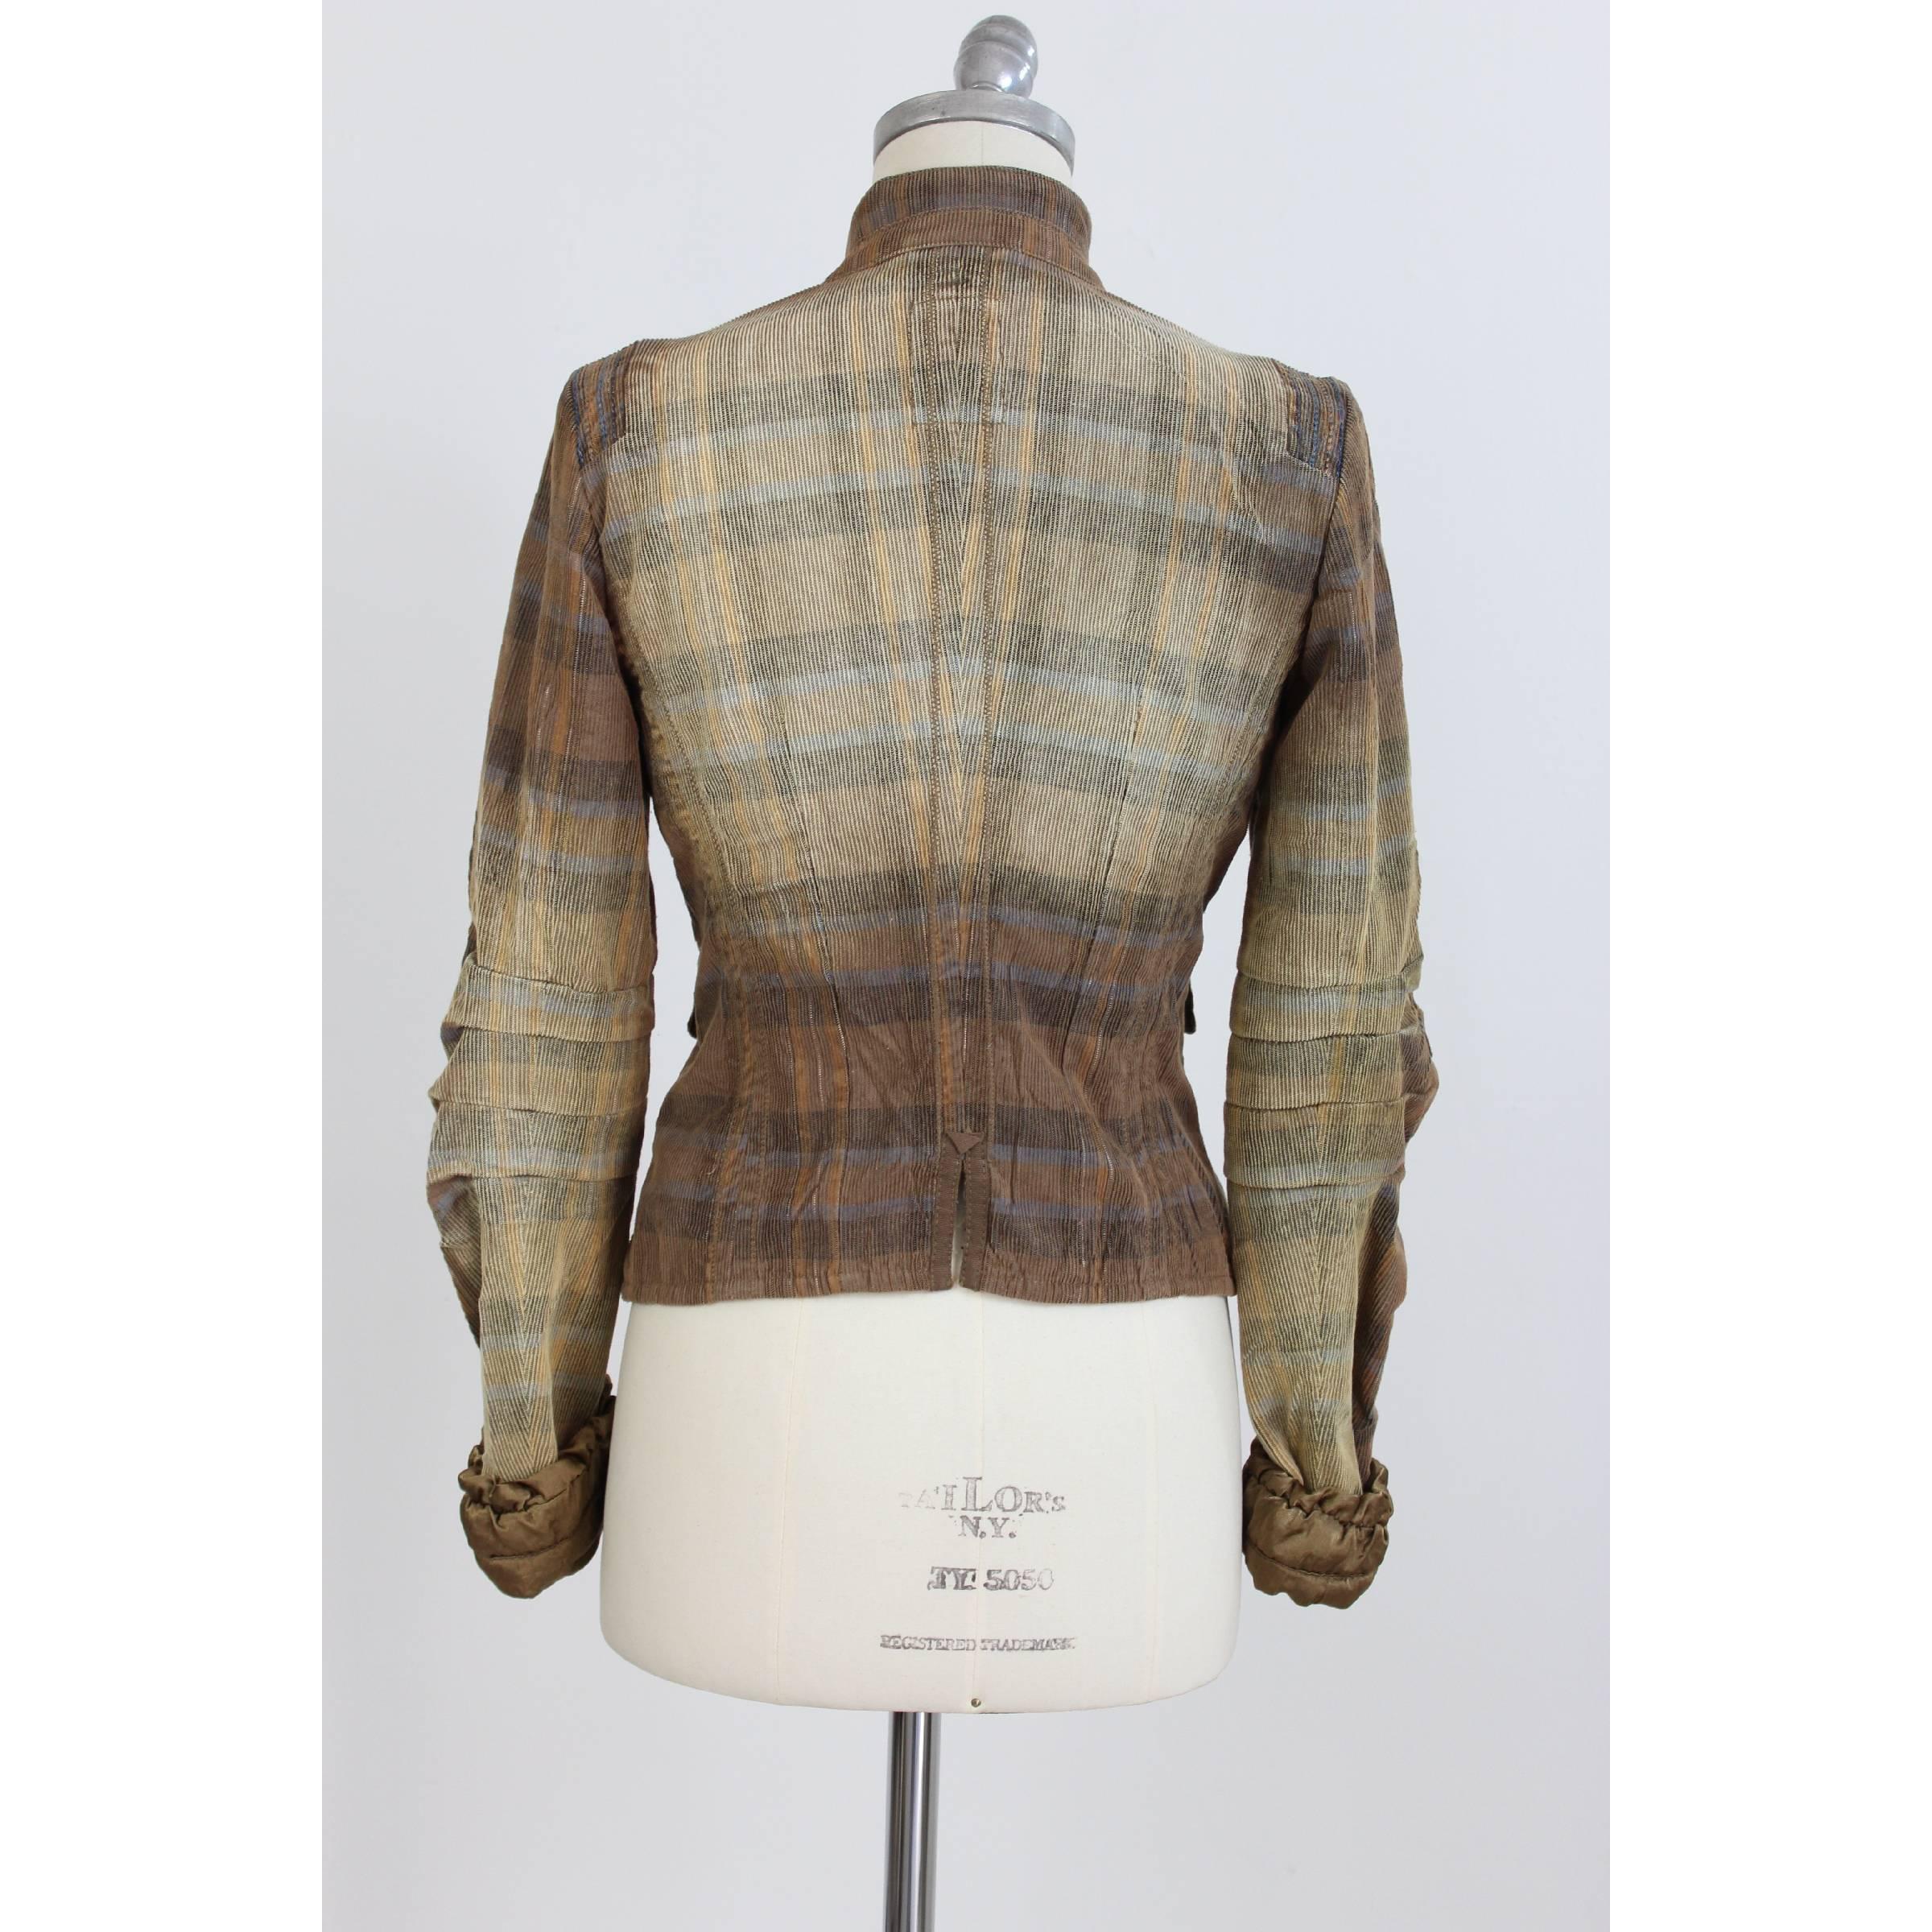 Marithe Francois Girbaud women's jacket. Brown color. The jacket with length on the sides has a closure with 4 buttons, two different from the others. There are drapes on the wrists. Made in China. Excellent vintage conditions.

Size 40 It 6 Us 8